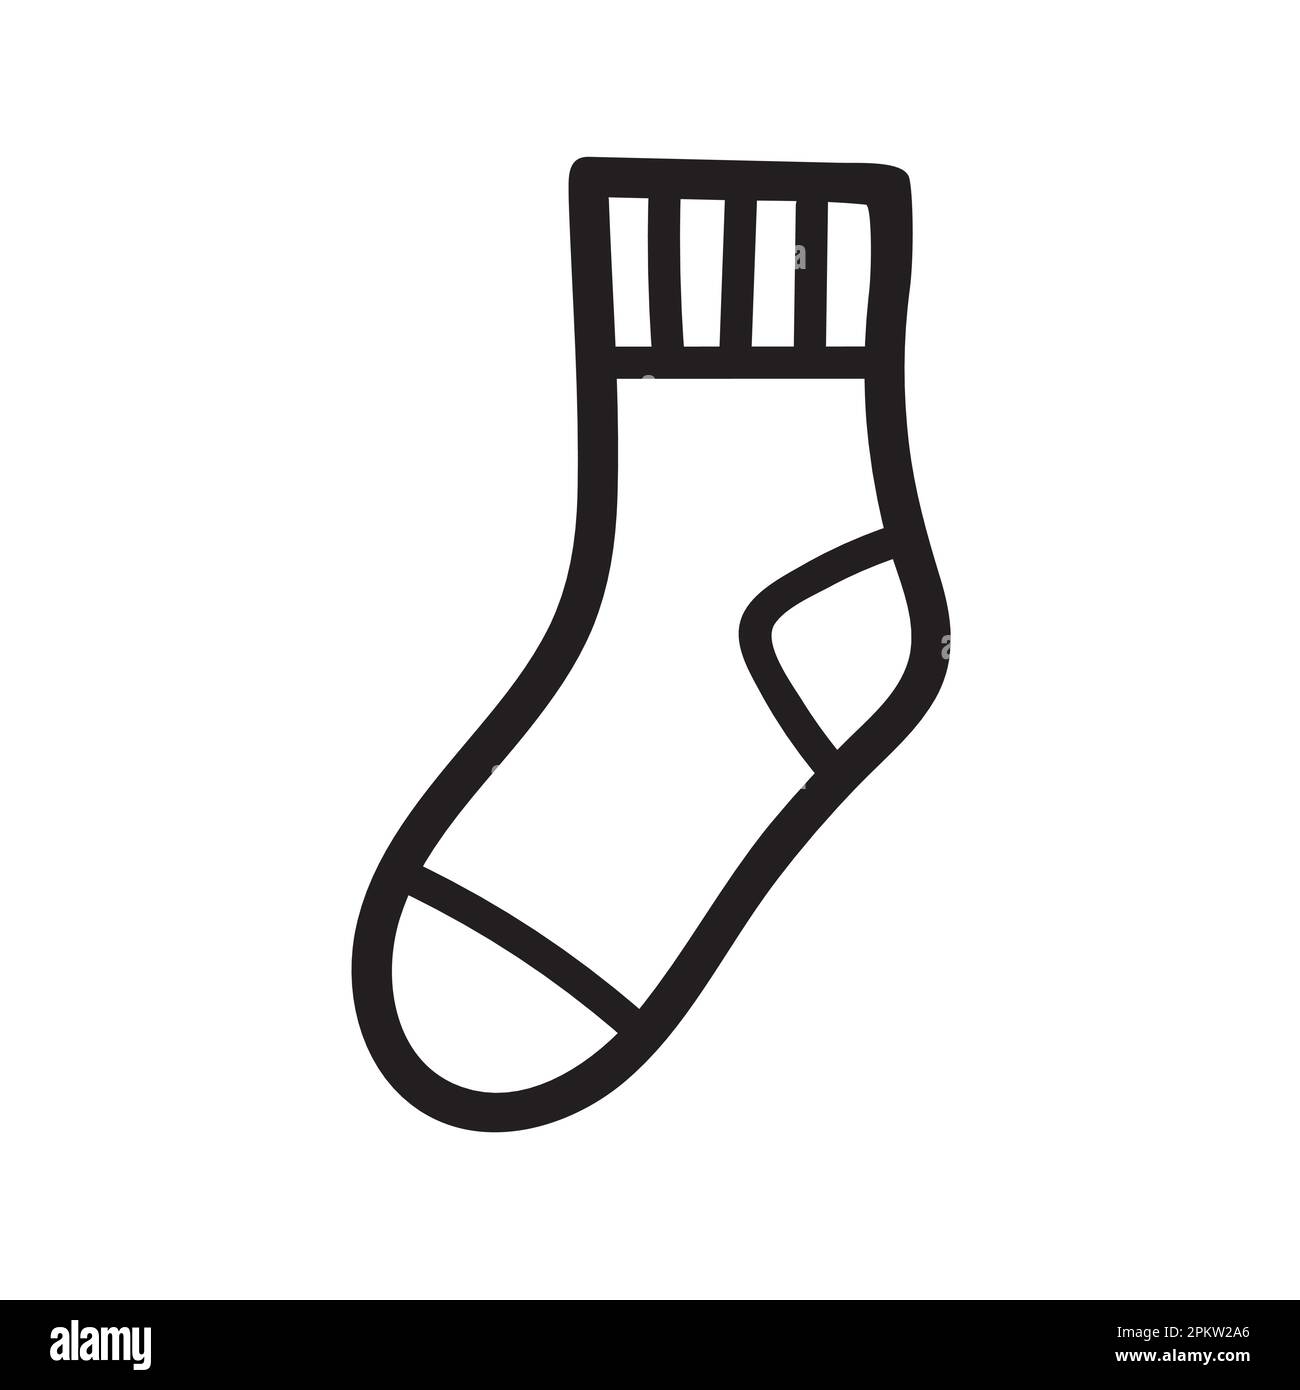 CARTOON OF A SOCK, ONLY THE LINES OF THE DRAWINGhot Stock Vector